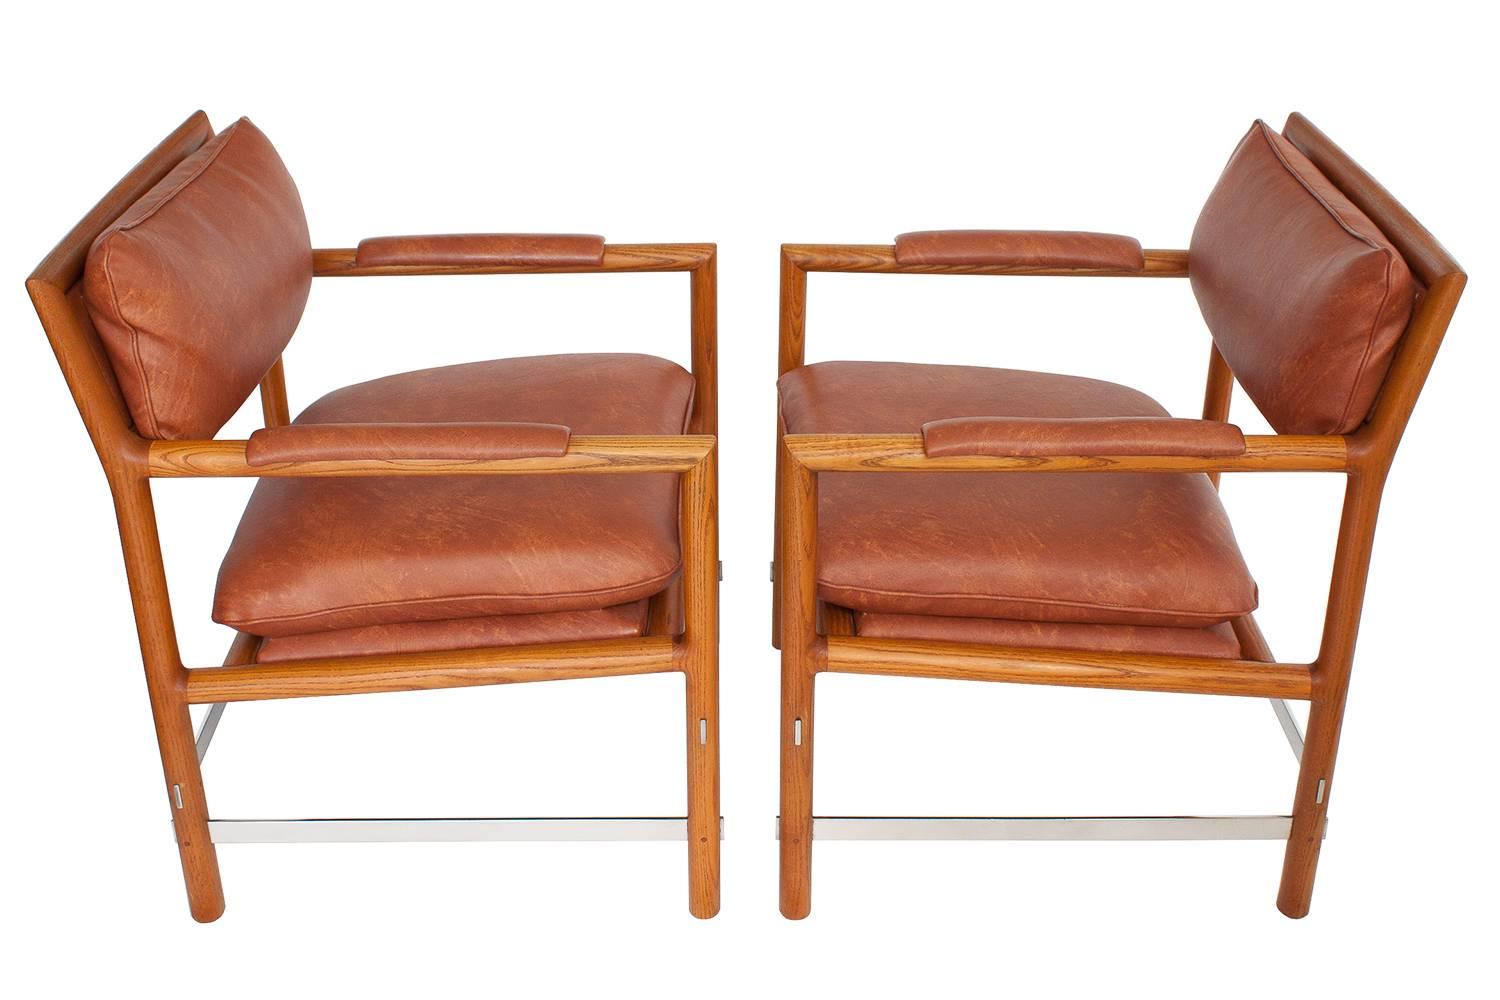 Pair of Dunbar armchairs, circa 1960s by Edward Wormley (1907-1995.) Known as "Edward's Chair," these handsome examples have oiled ash wood frames and stainless steel stretchers. These chairs have been recovered at some point in time in a